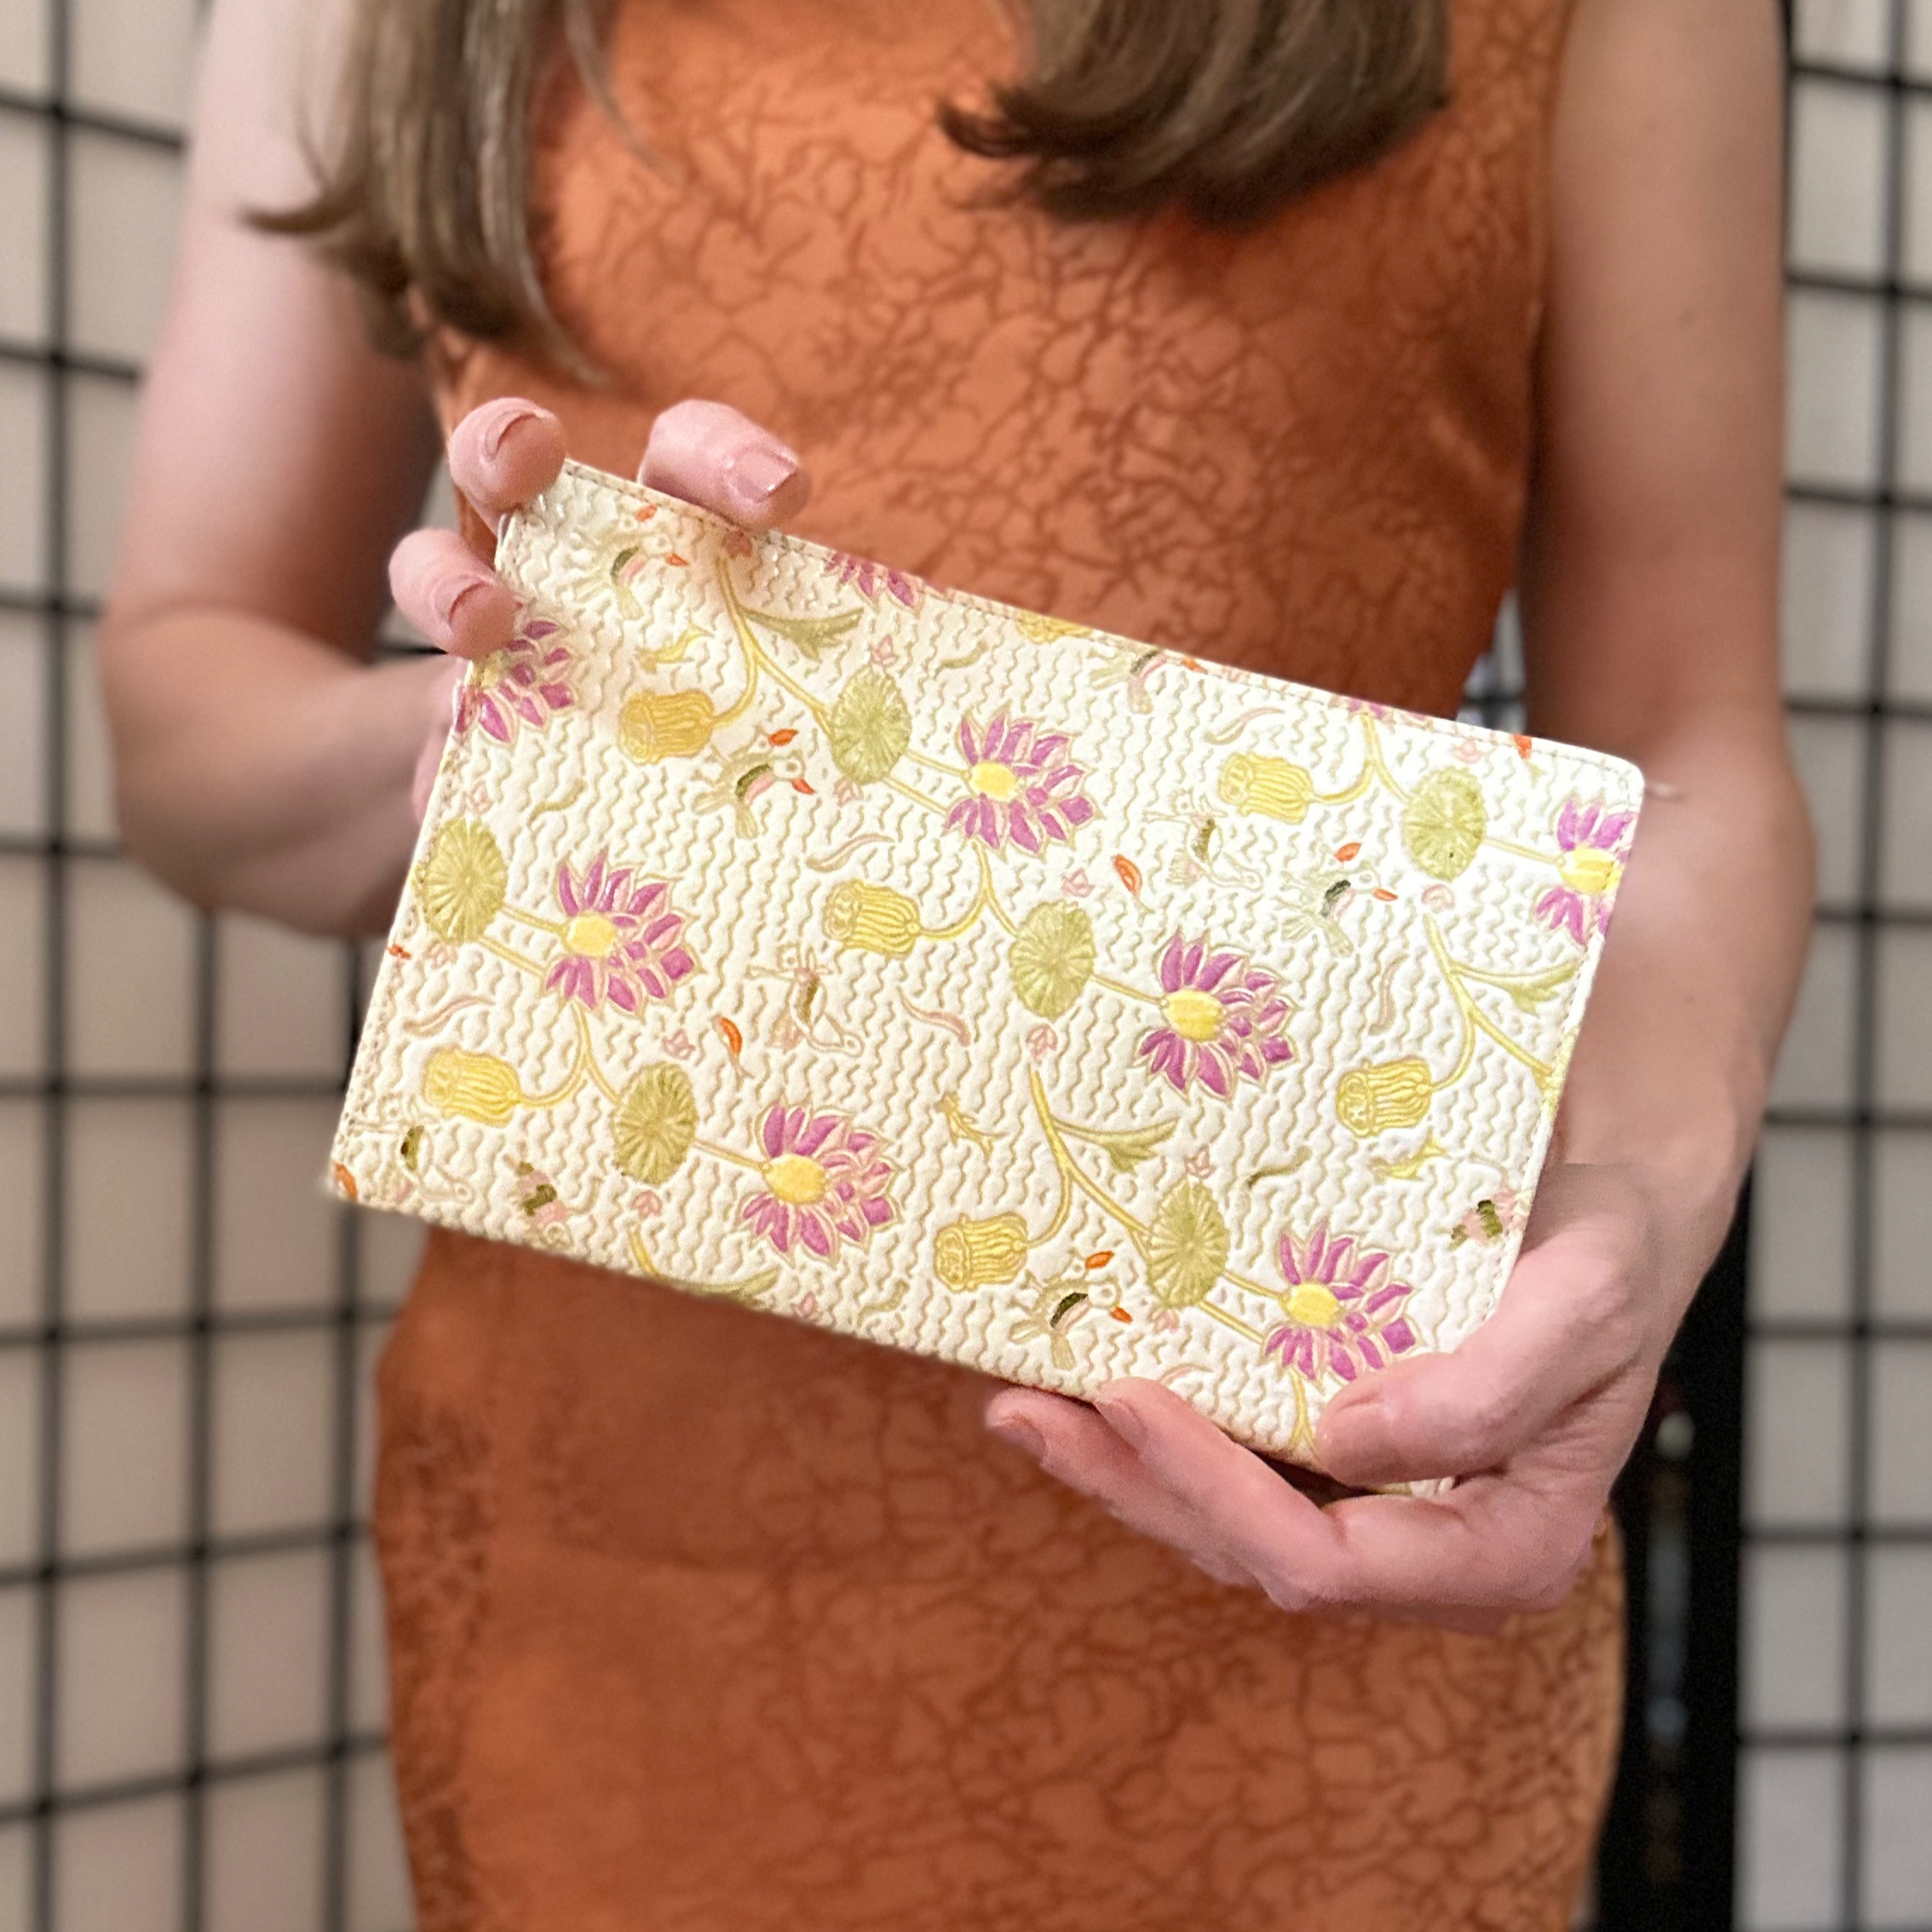 Floral Clutch Perfect for Wedding Guests